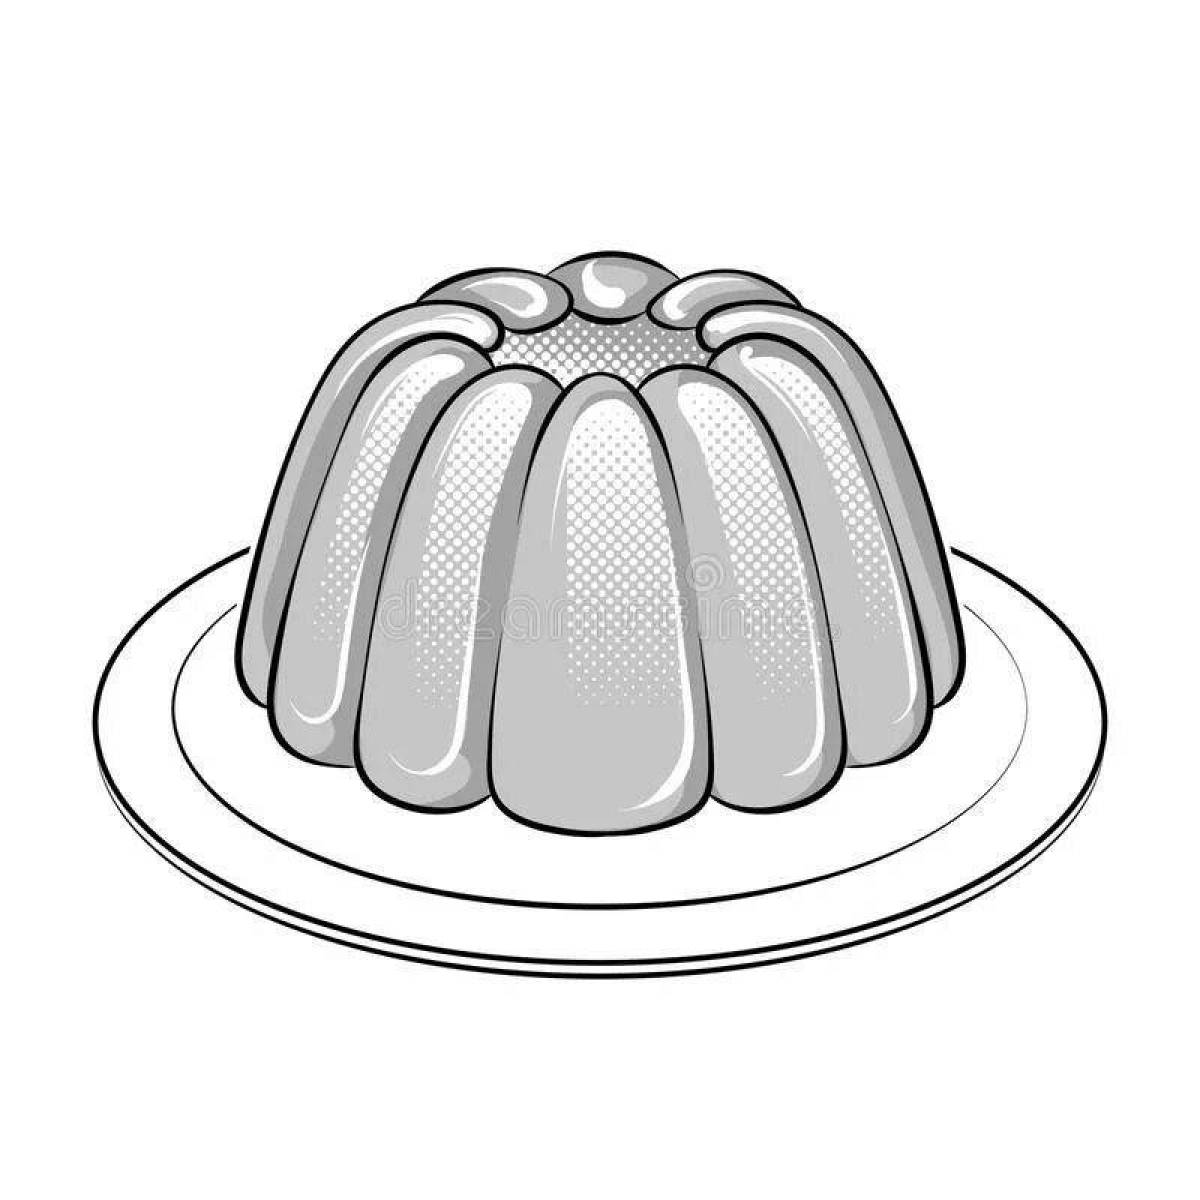 Invigorating jelly coloring page